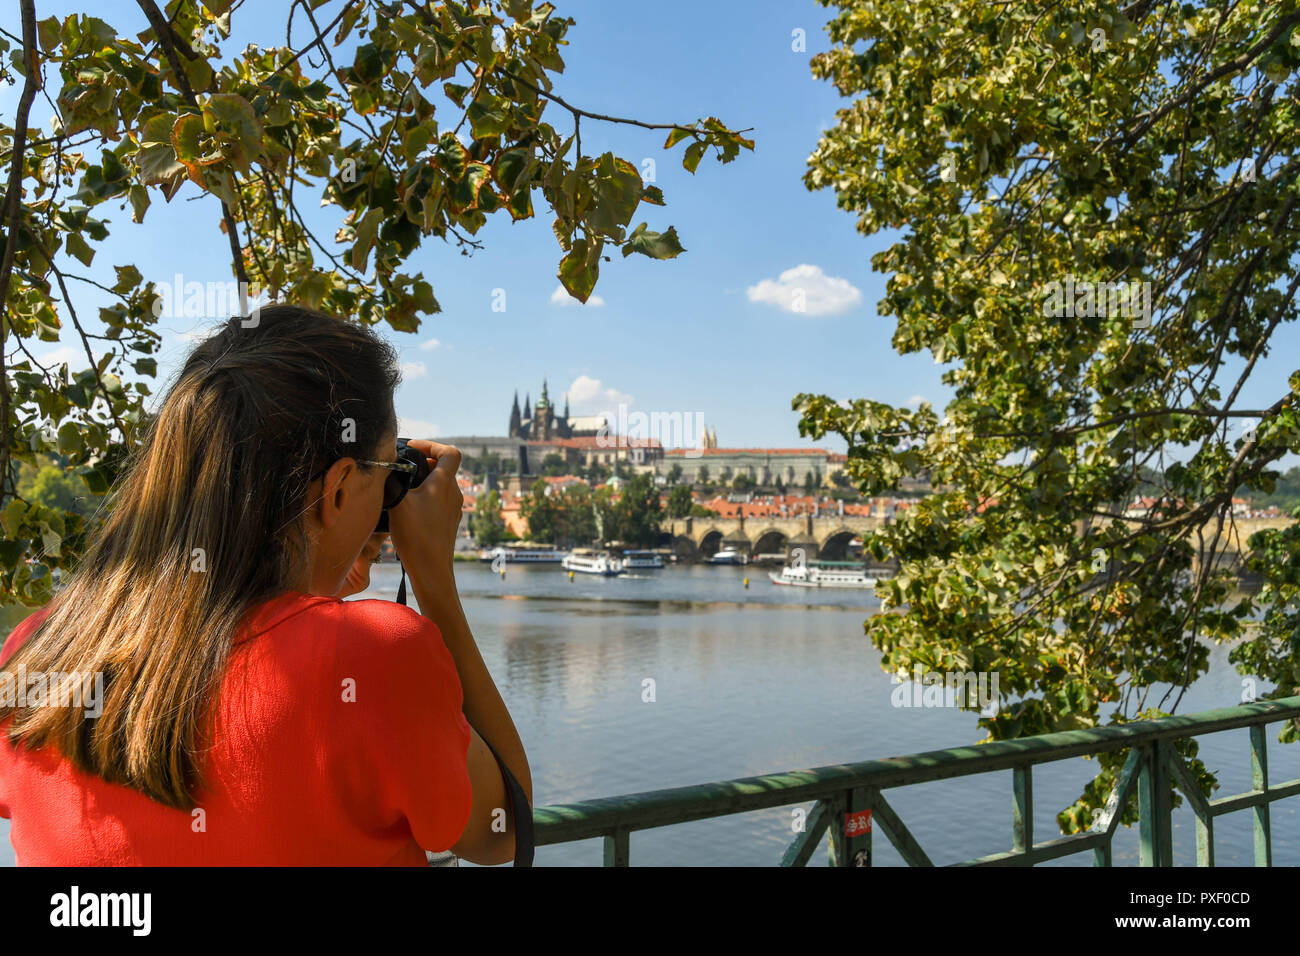 PRAGUE, CZECH REPUBLIC - SPETEMBER 2018: Tourist taking a picture of the River Vltava and city skyline in Prague. Stock Photo